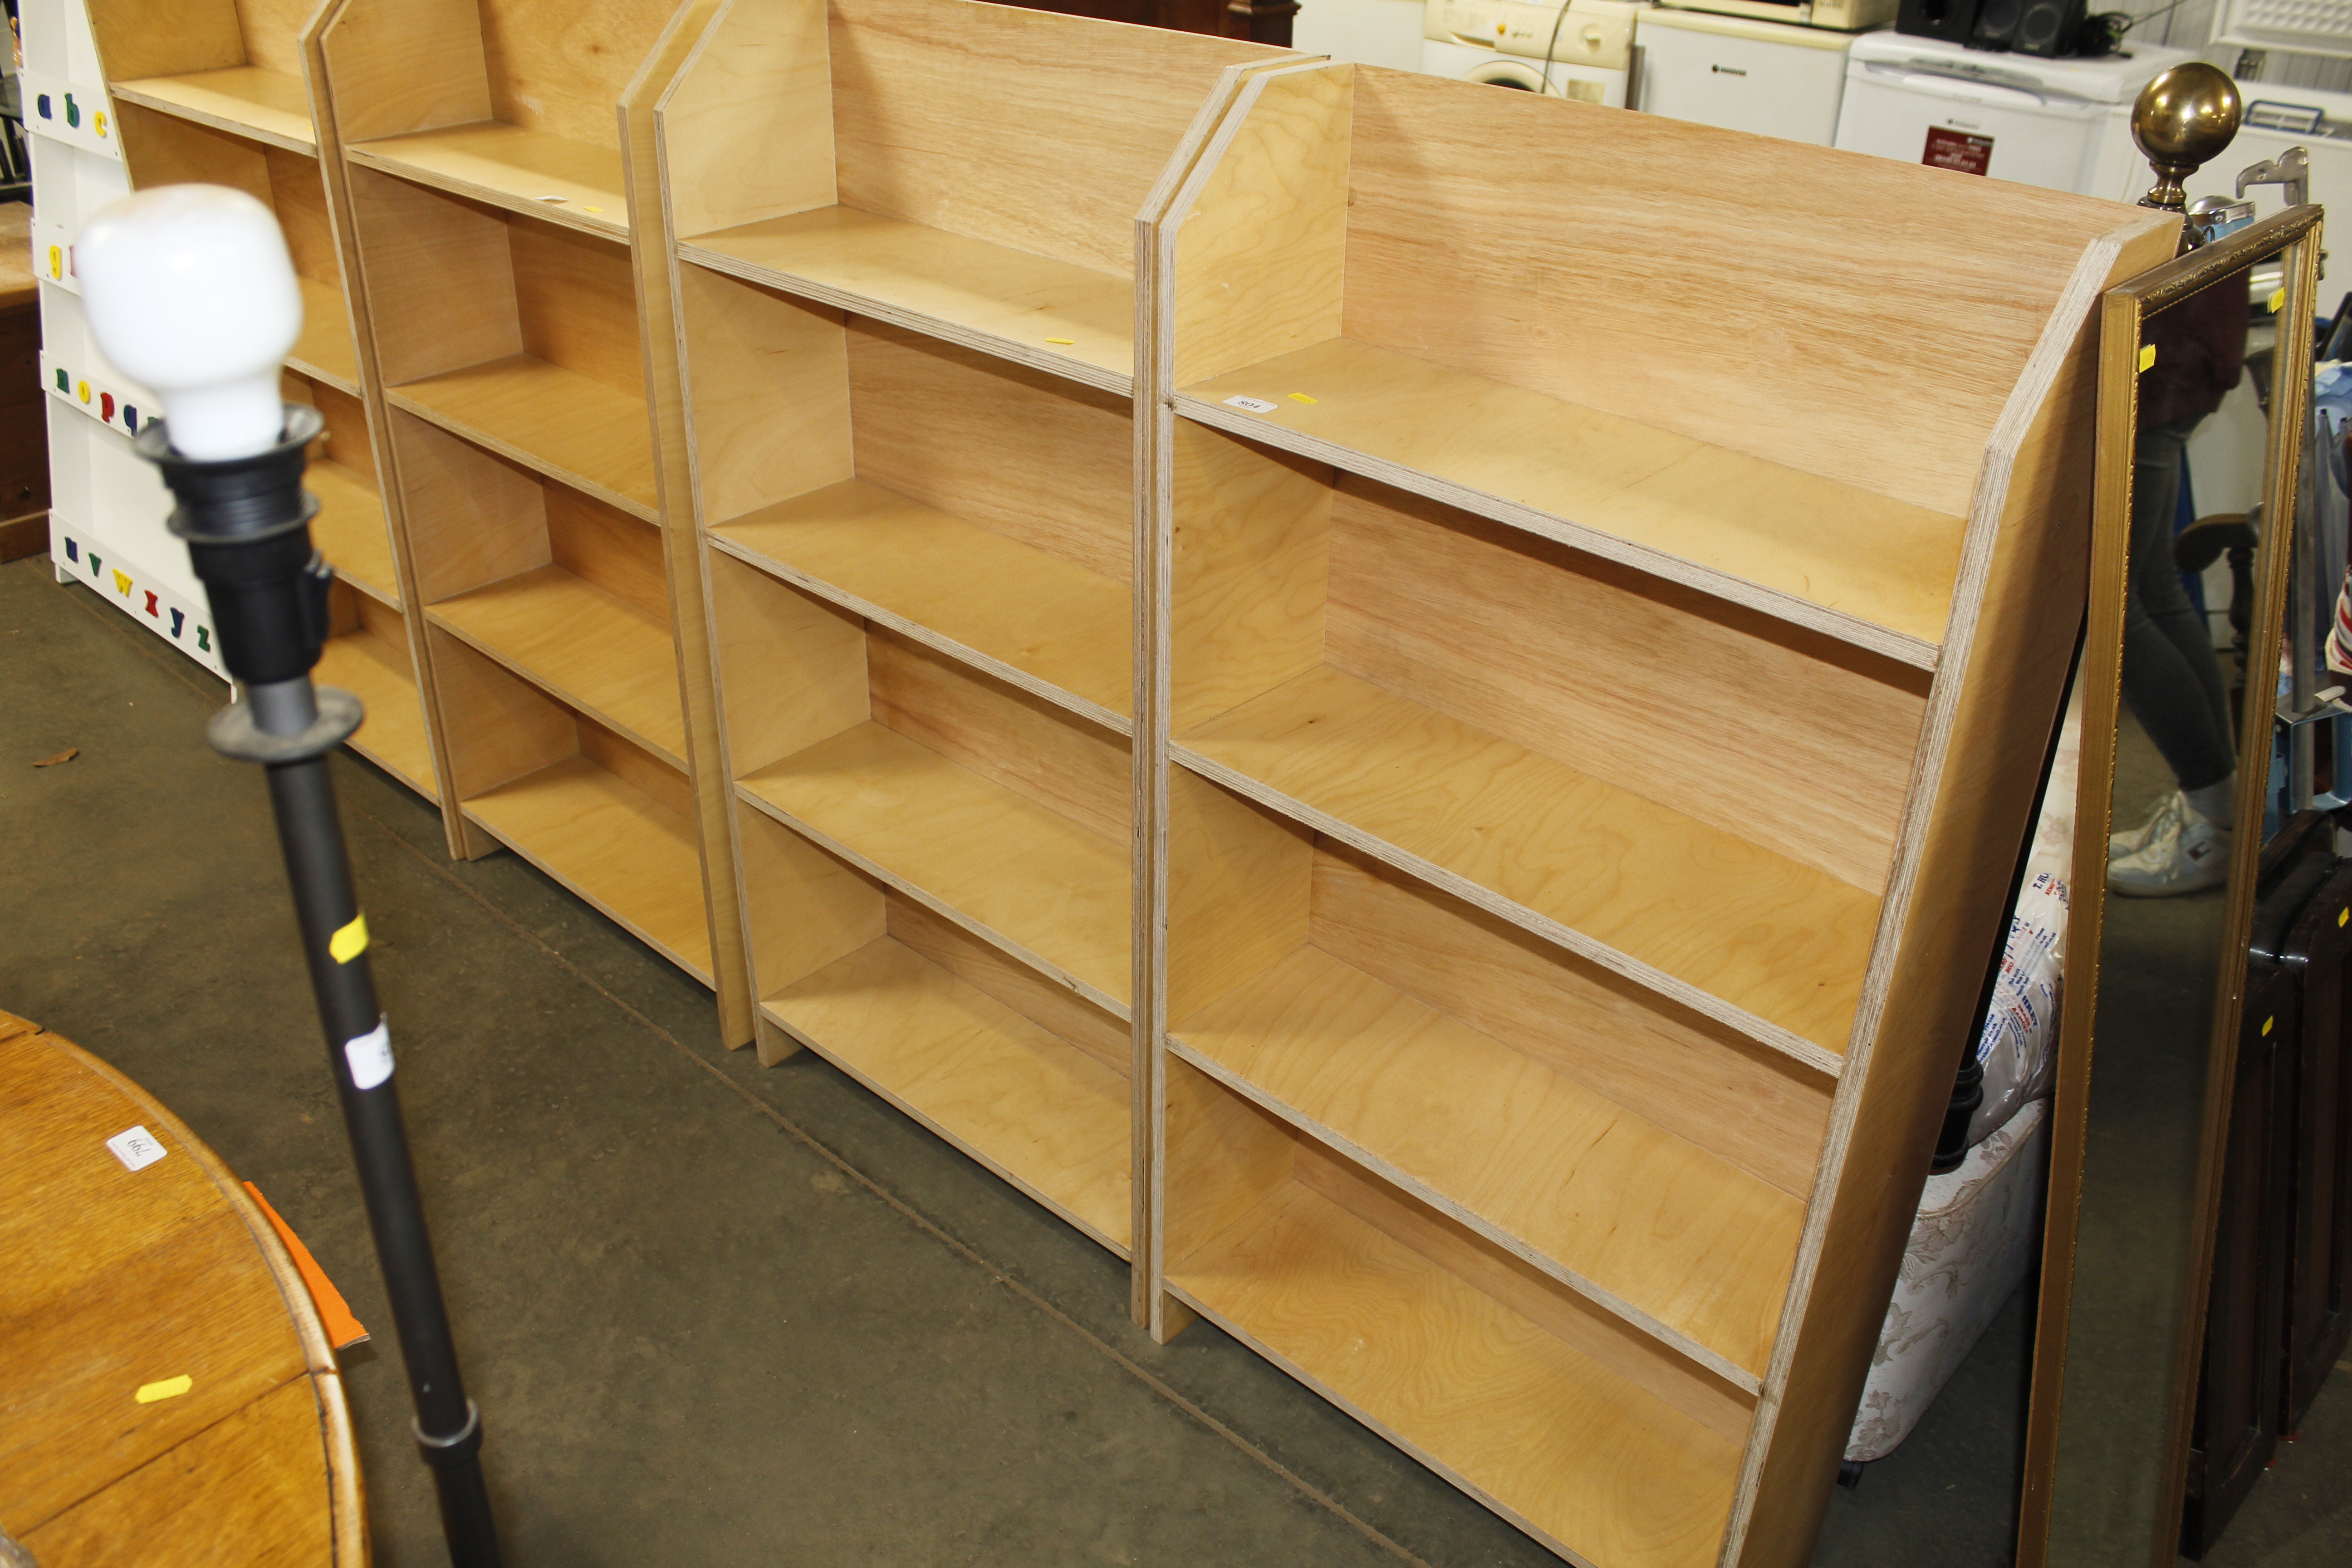 Two plywood bookcases